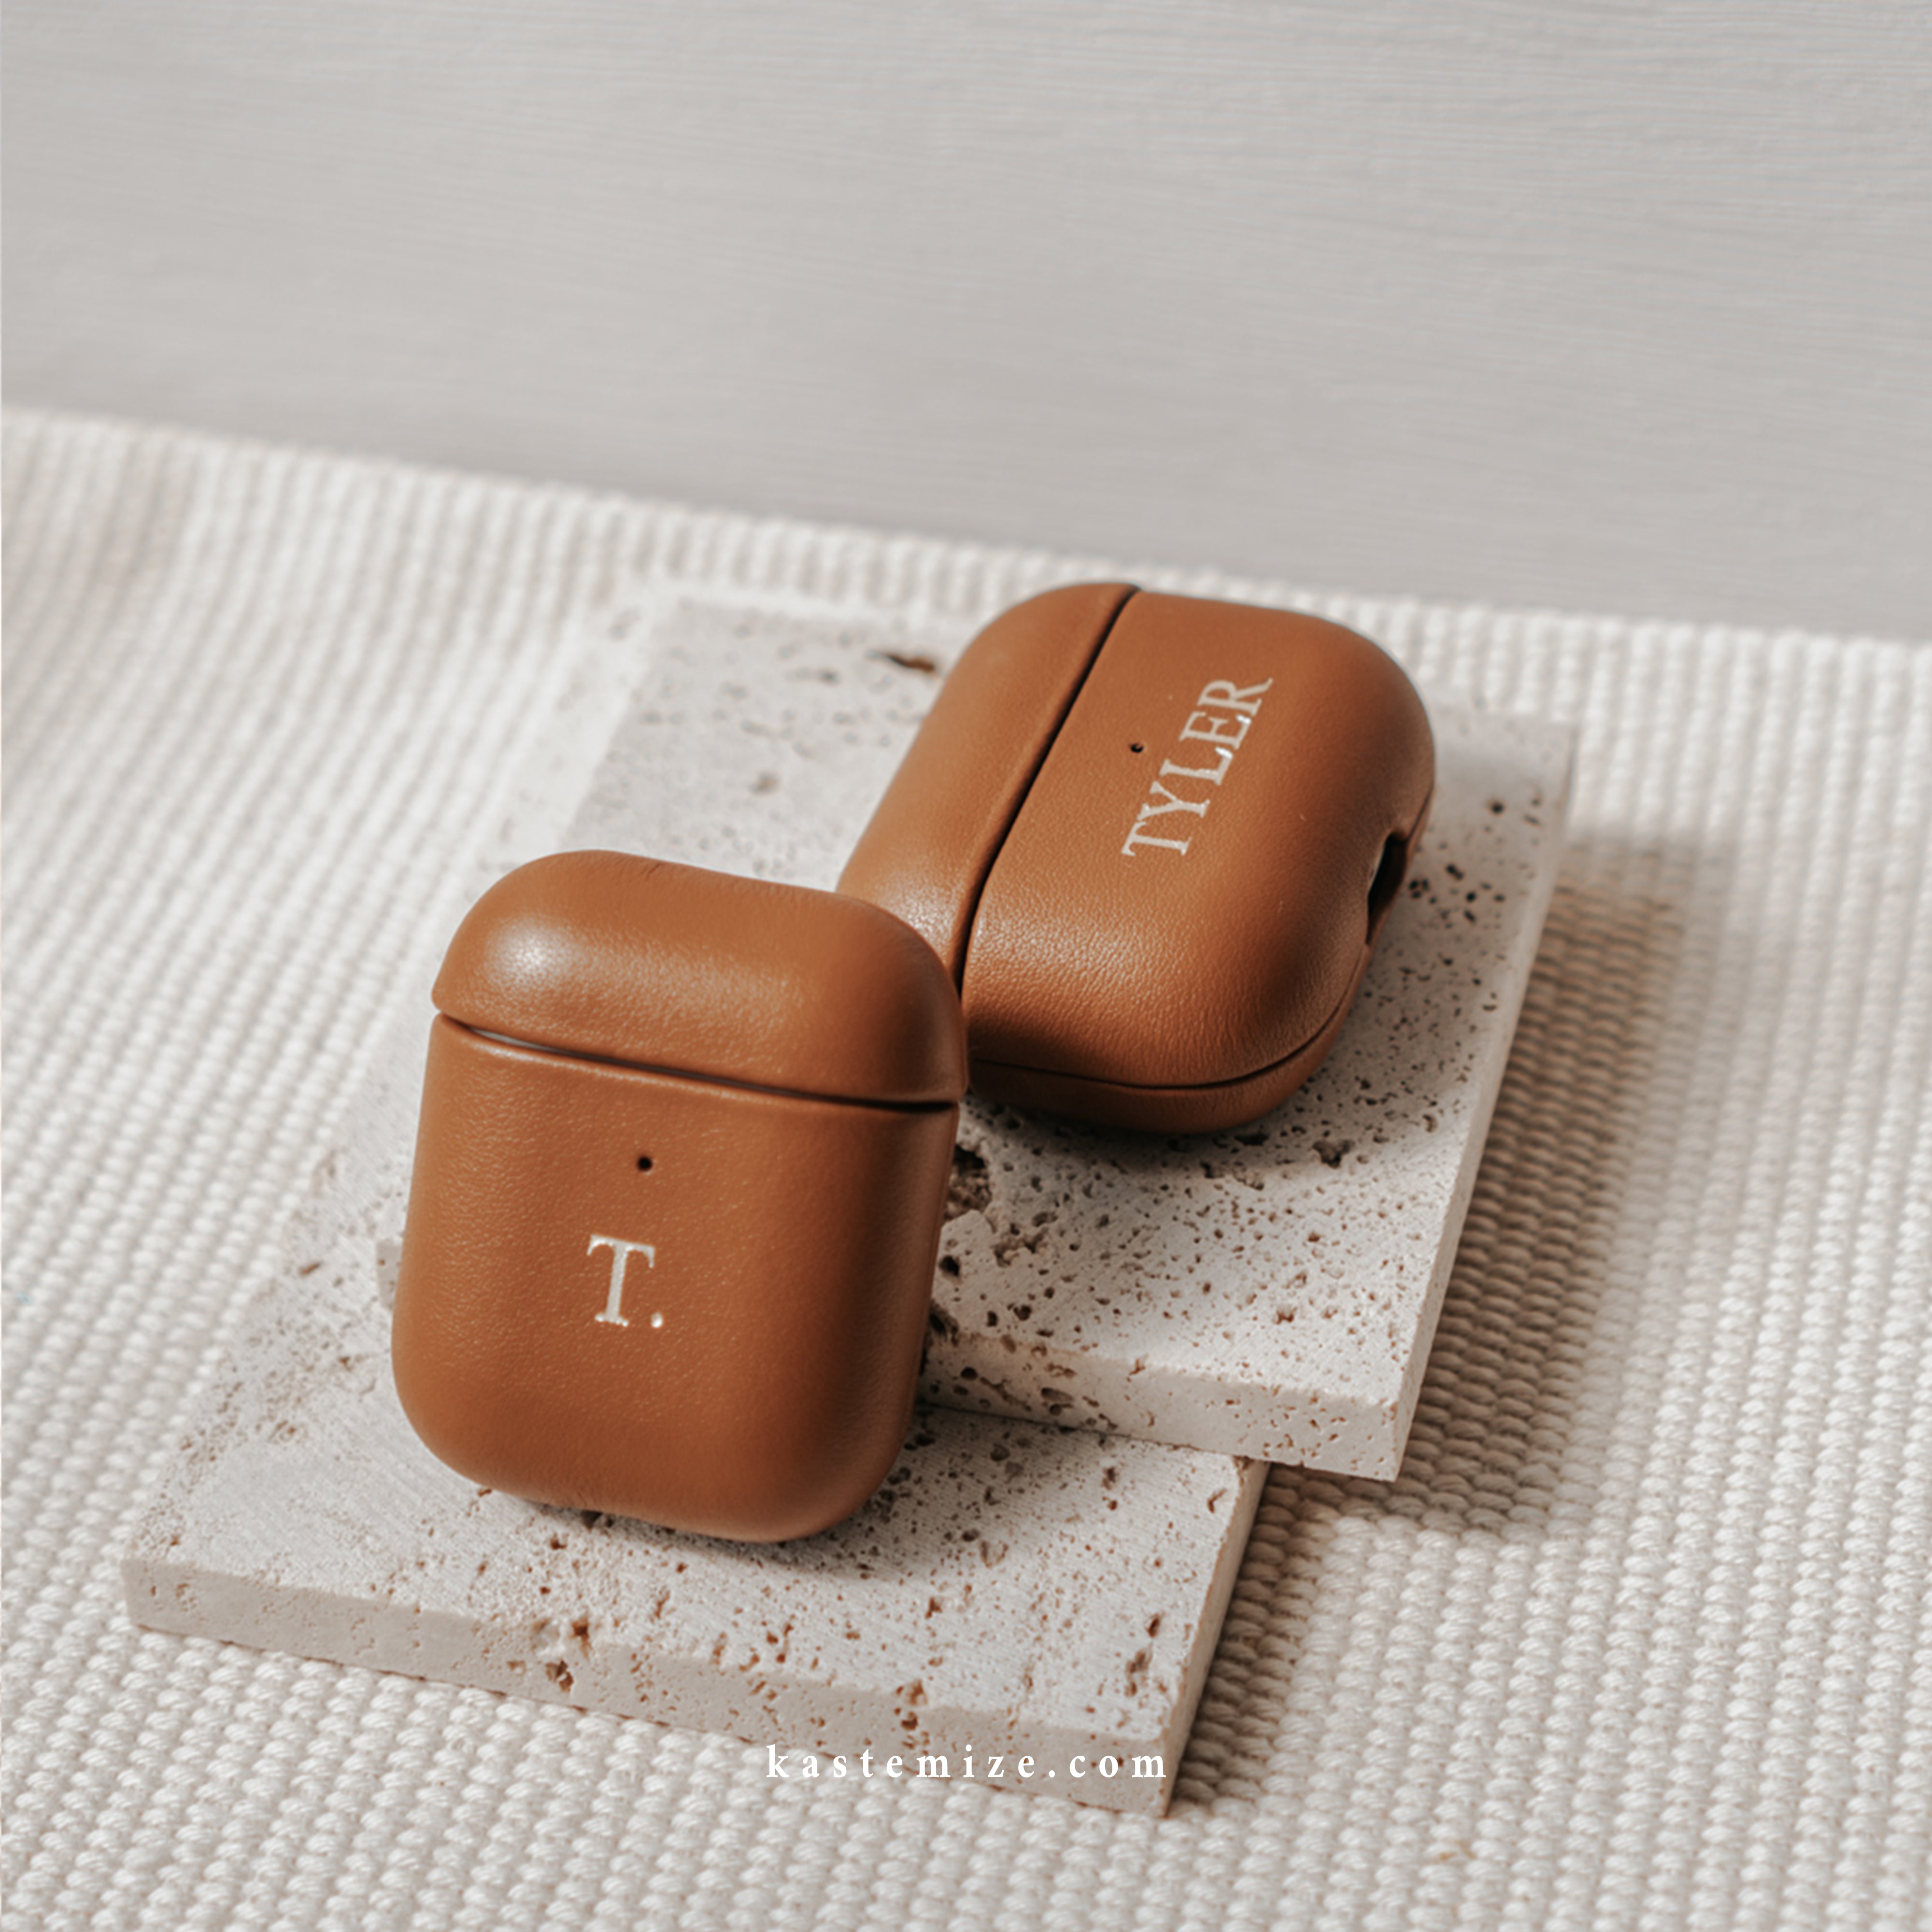 Dawson Leather Airpods Pro Case in Brown - Kastemize